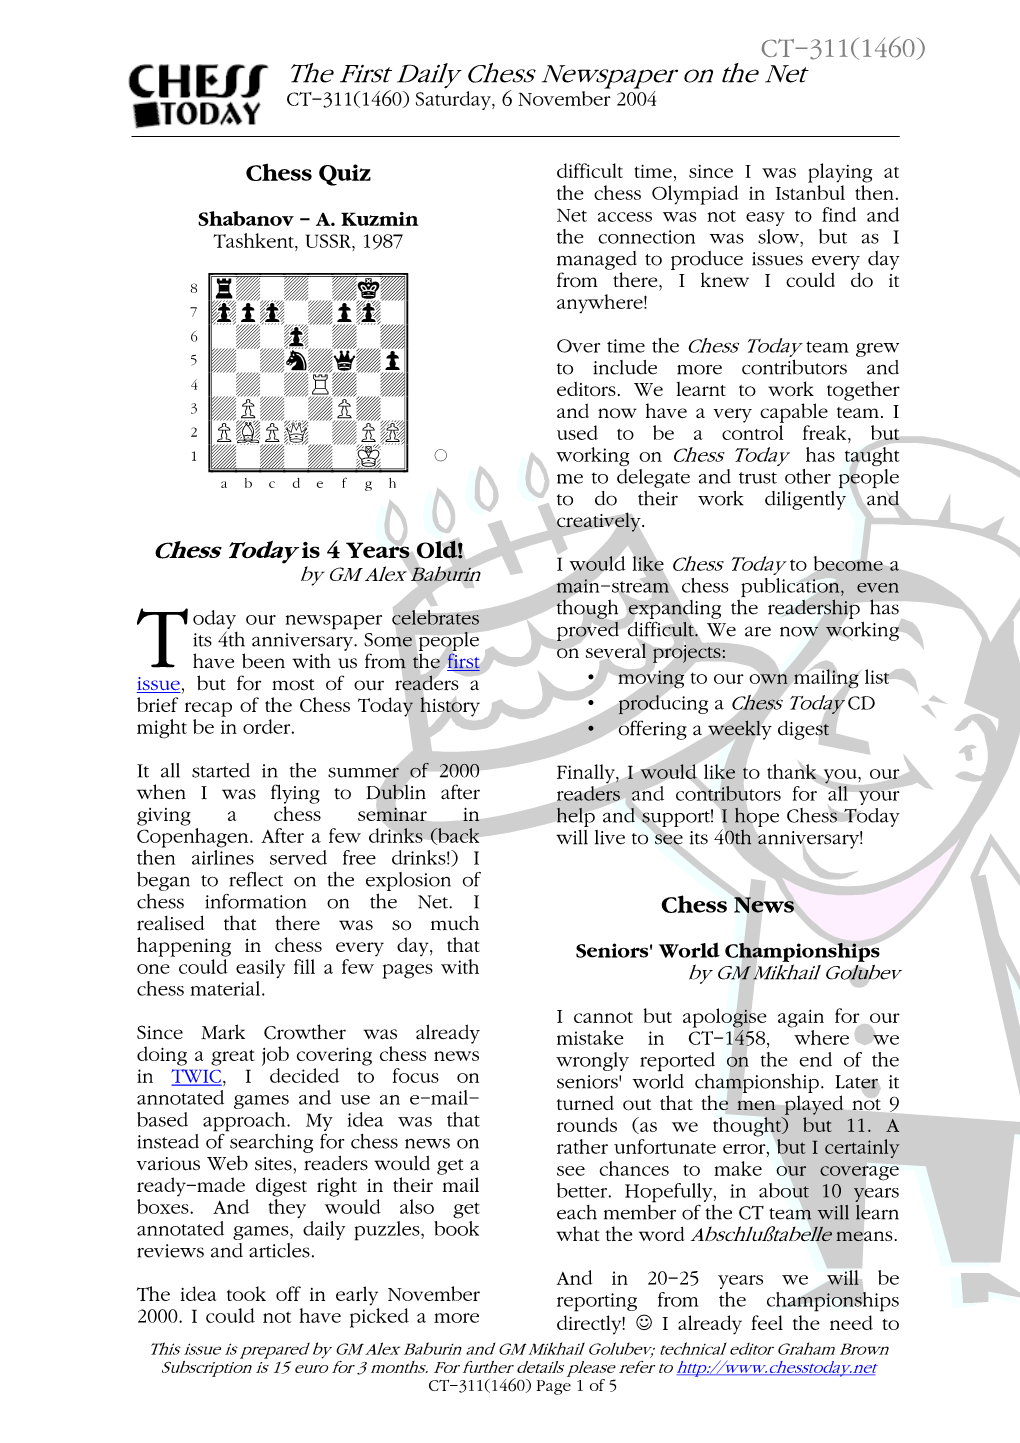 The First Daily Chess Newspaper on the Net CT-311(1460) Saturday, 6 November 2004